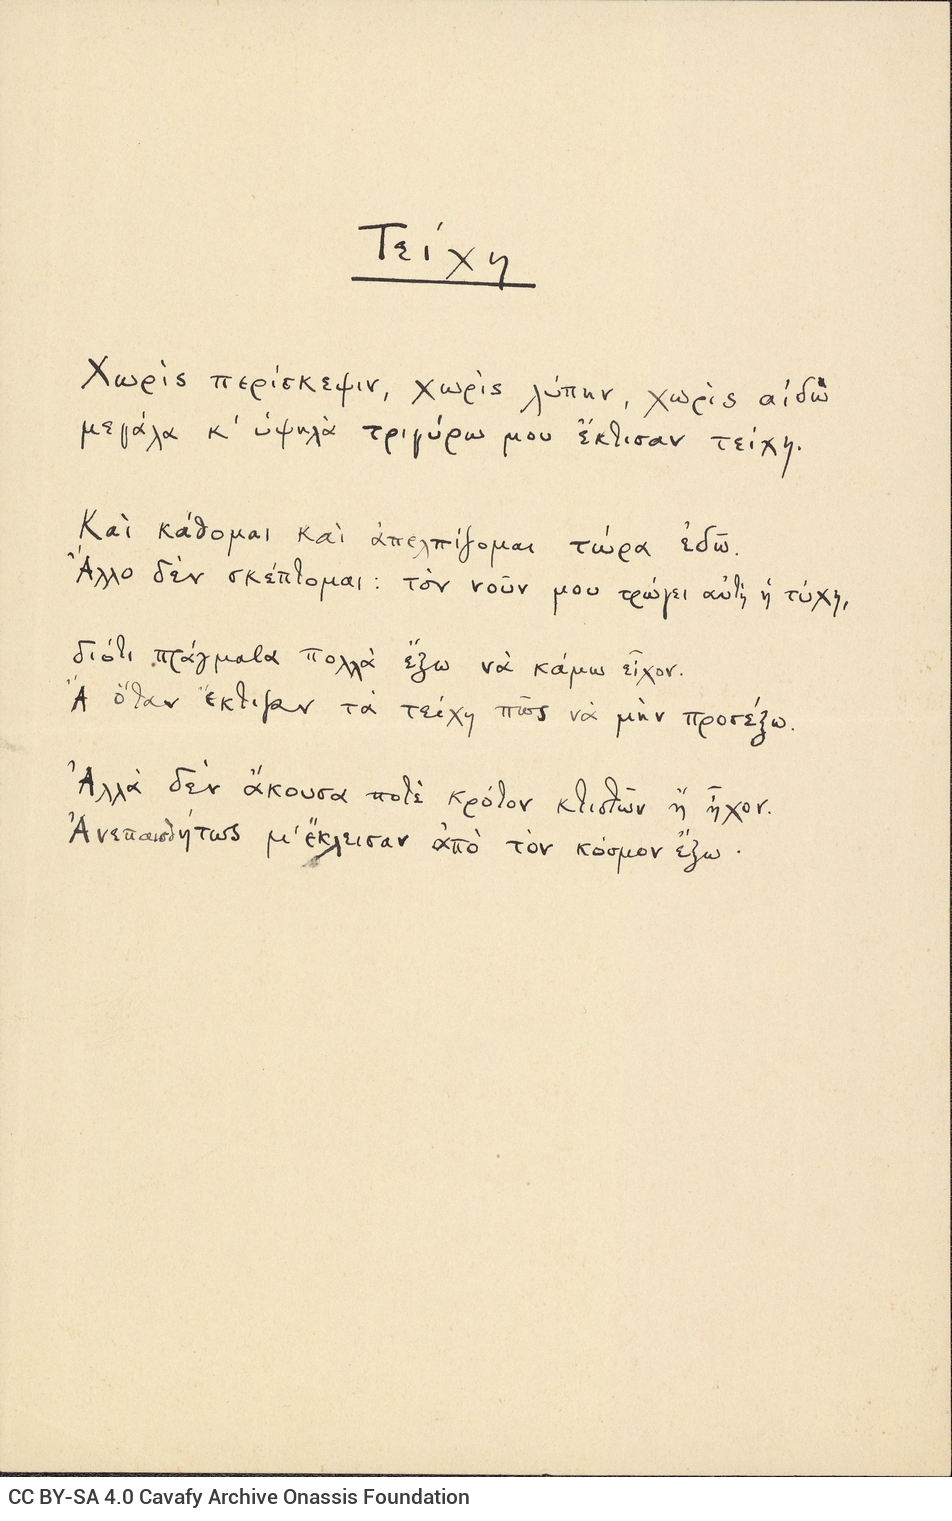 Manuscript of the poem "Walls" on one side of a sheet.